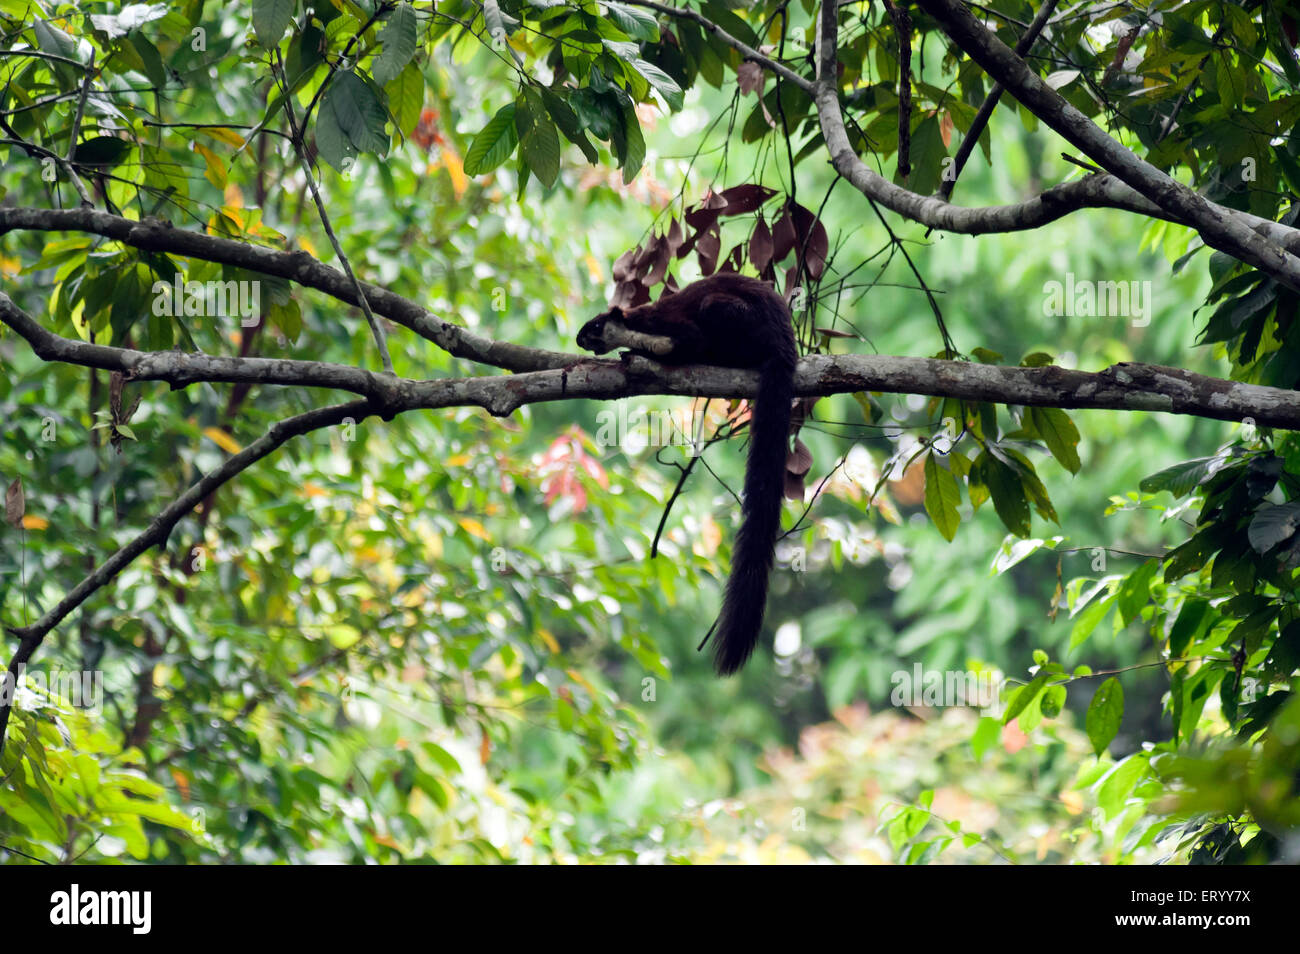 Malayan Giant Squirrel on tree in Jorhat at Assam India Asia Stock Photo